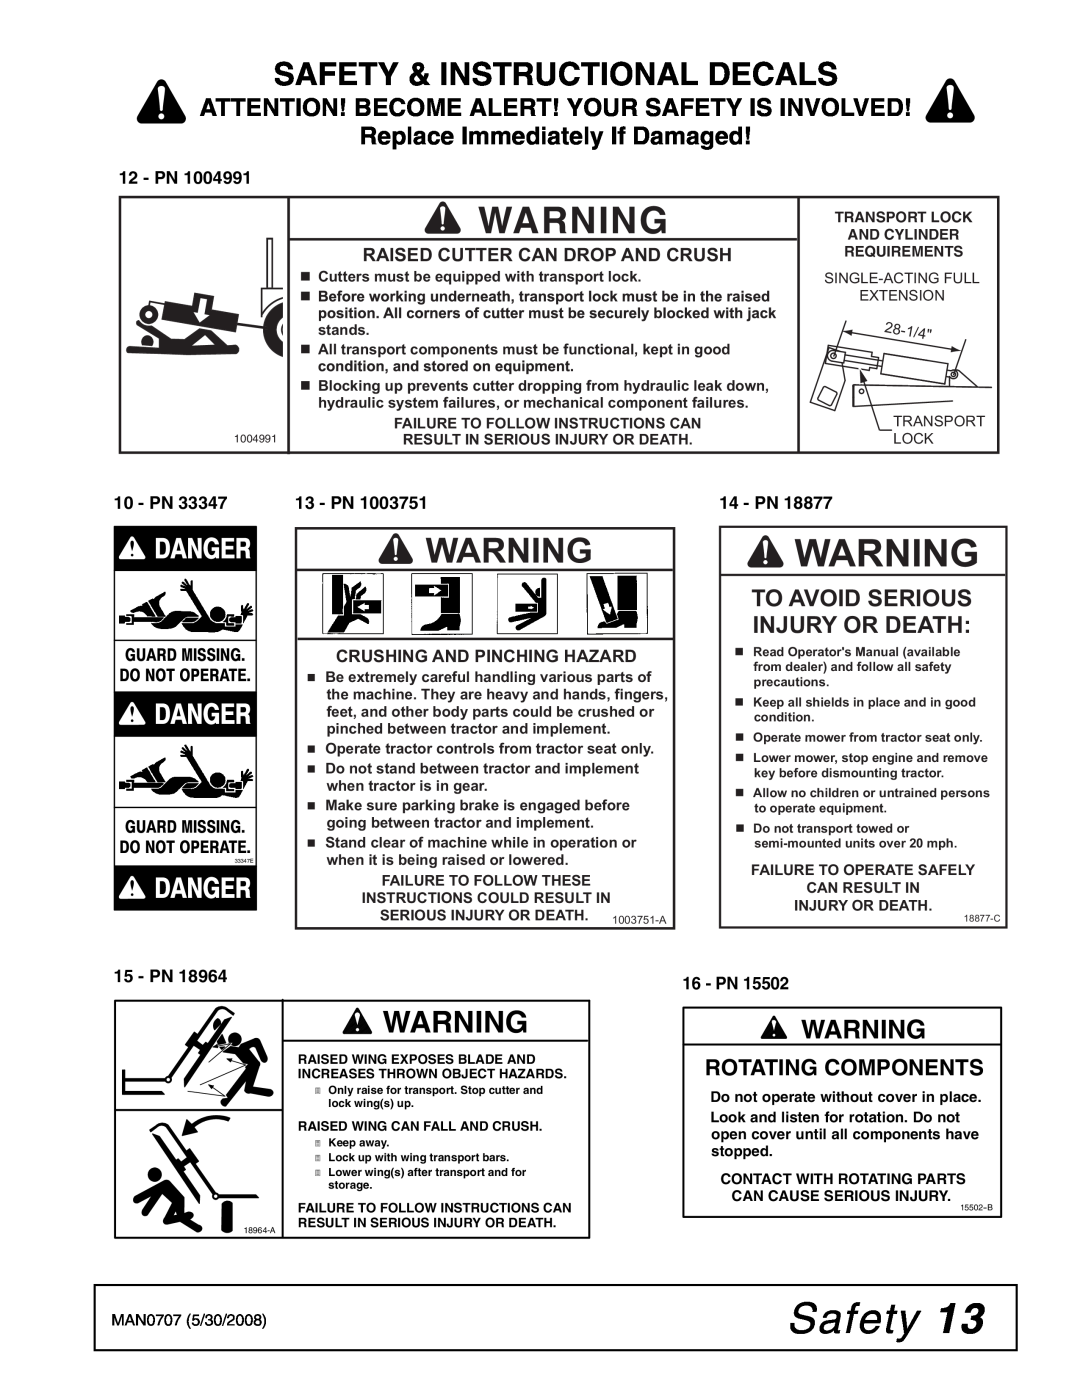 Woods Equipment BW126HB Safety & Instructional Decals, 33347E, Attention! Become Alert! Your Safety Is Involved, Pn 